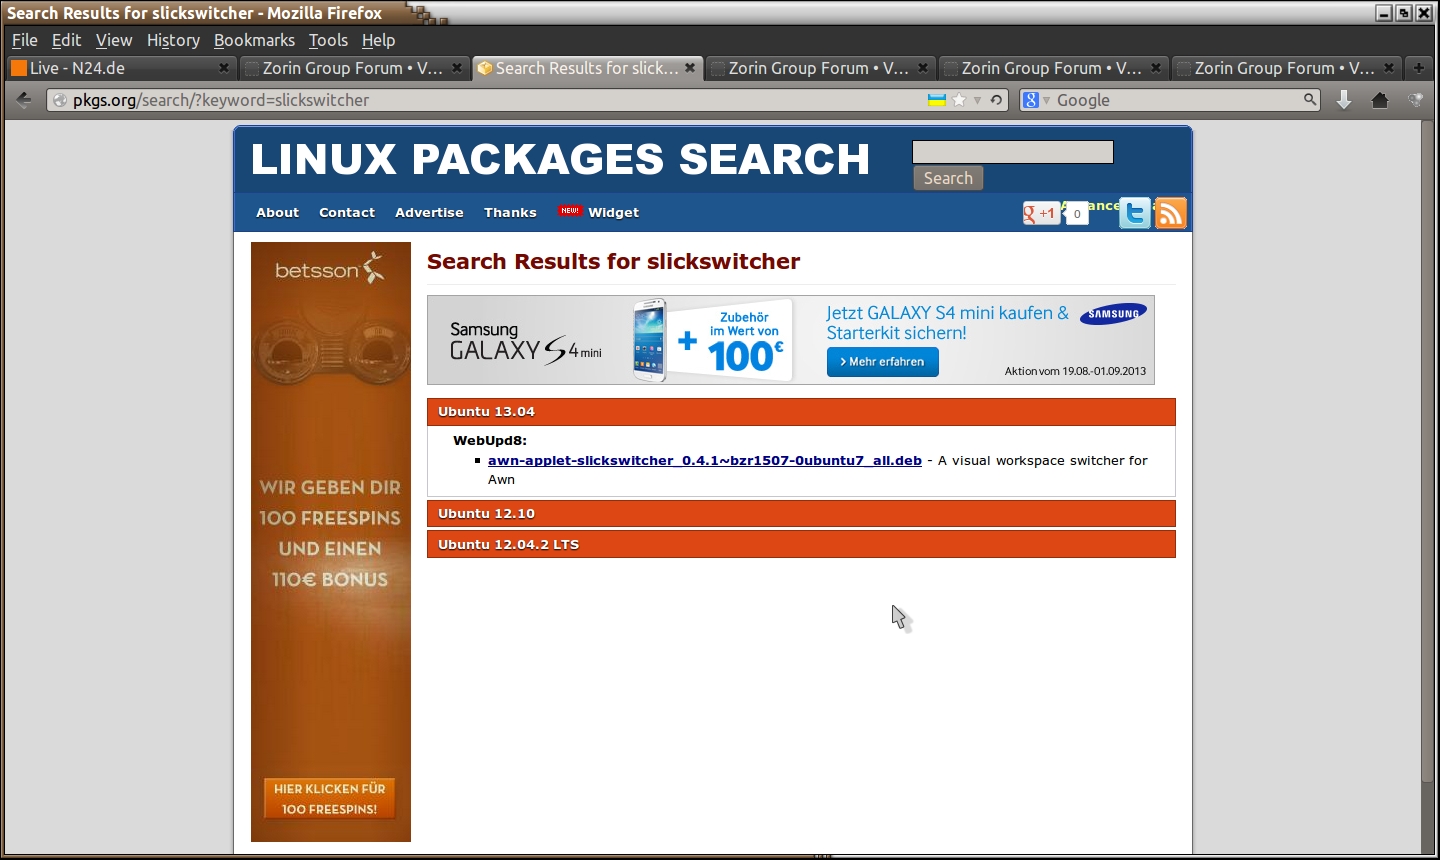 Search Results for slickswitcher - Mozilla Firefox_035.jpg